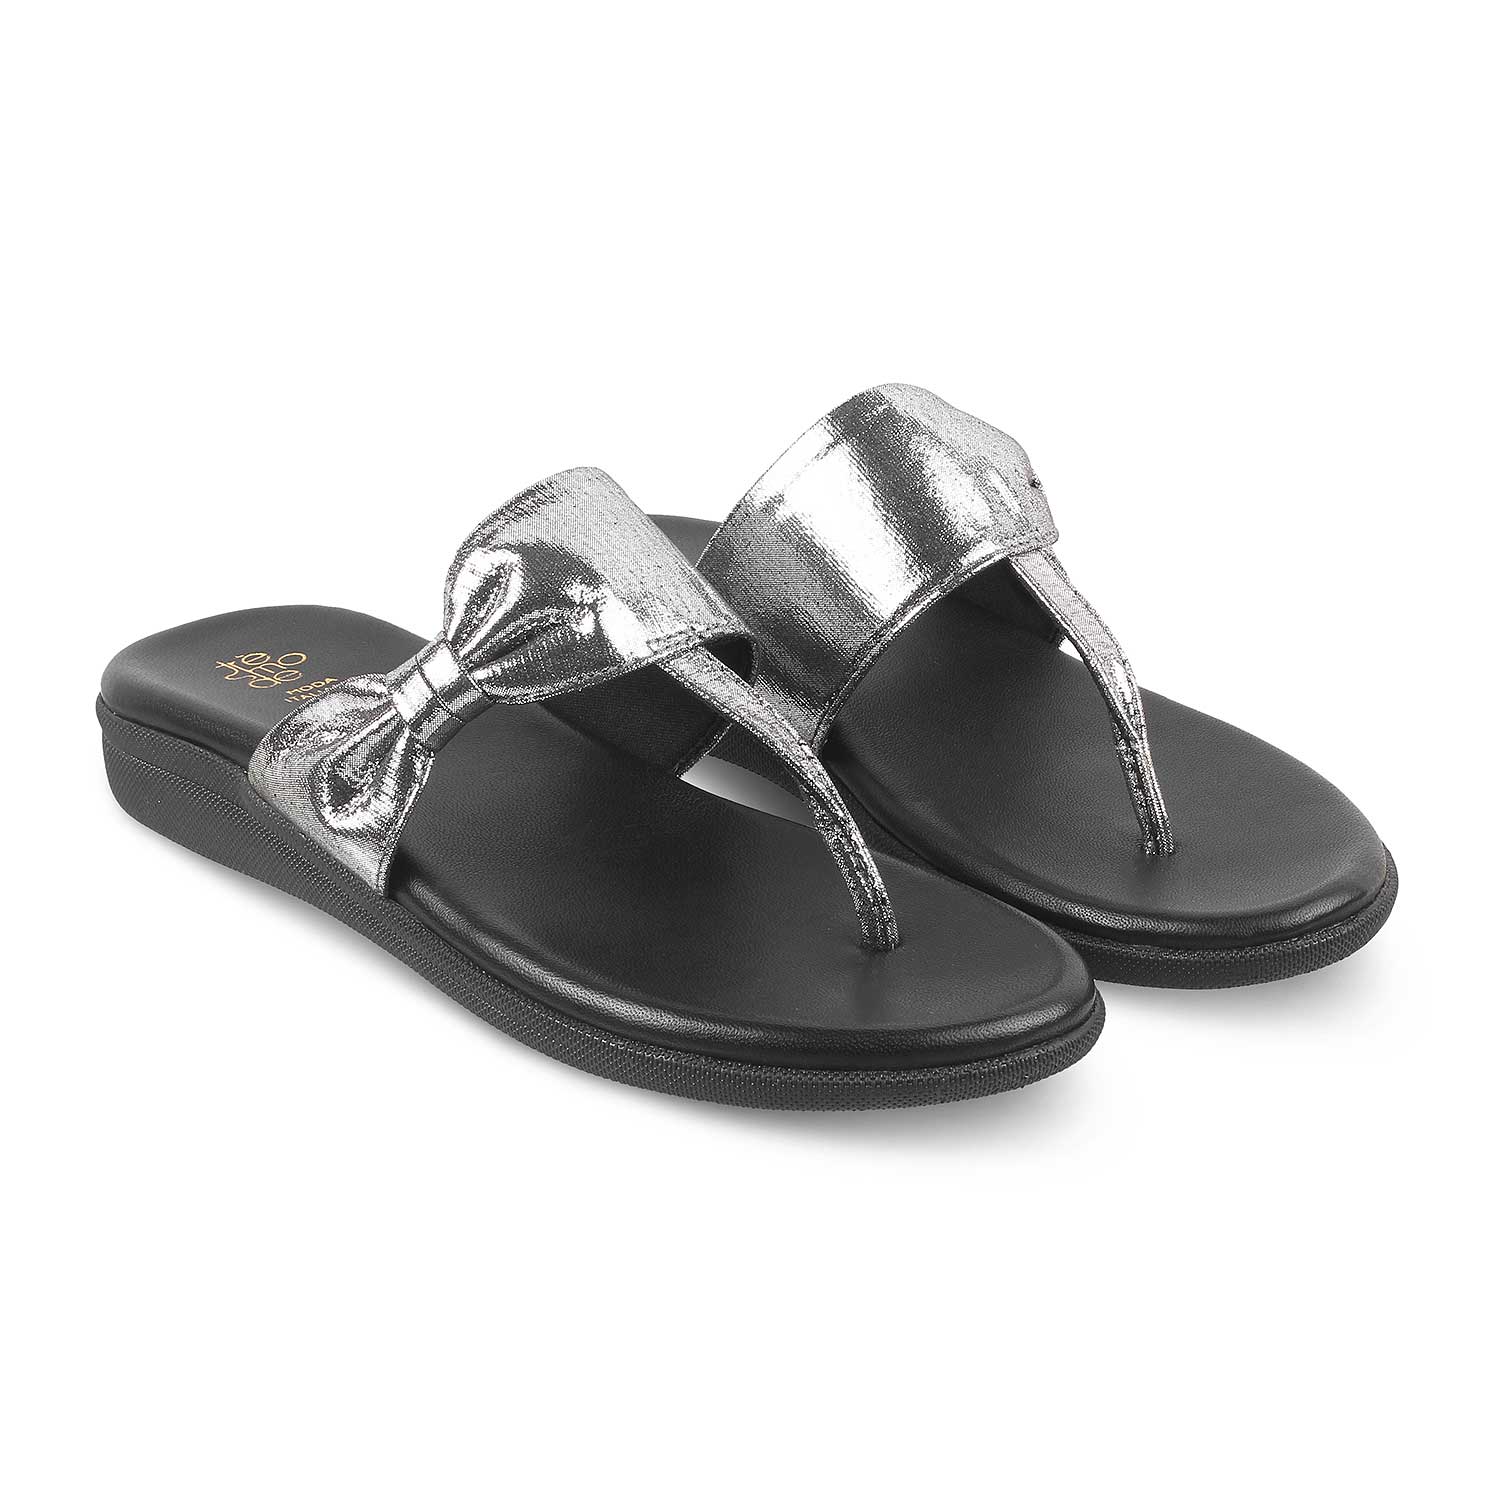 Tresmode-The Bow-2 Silver Women's Casual Flats Tresmode-Tresmode